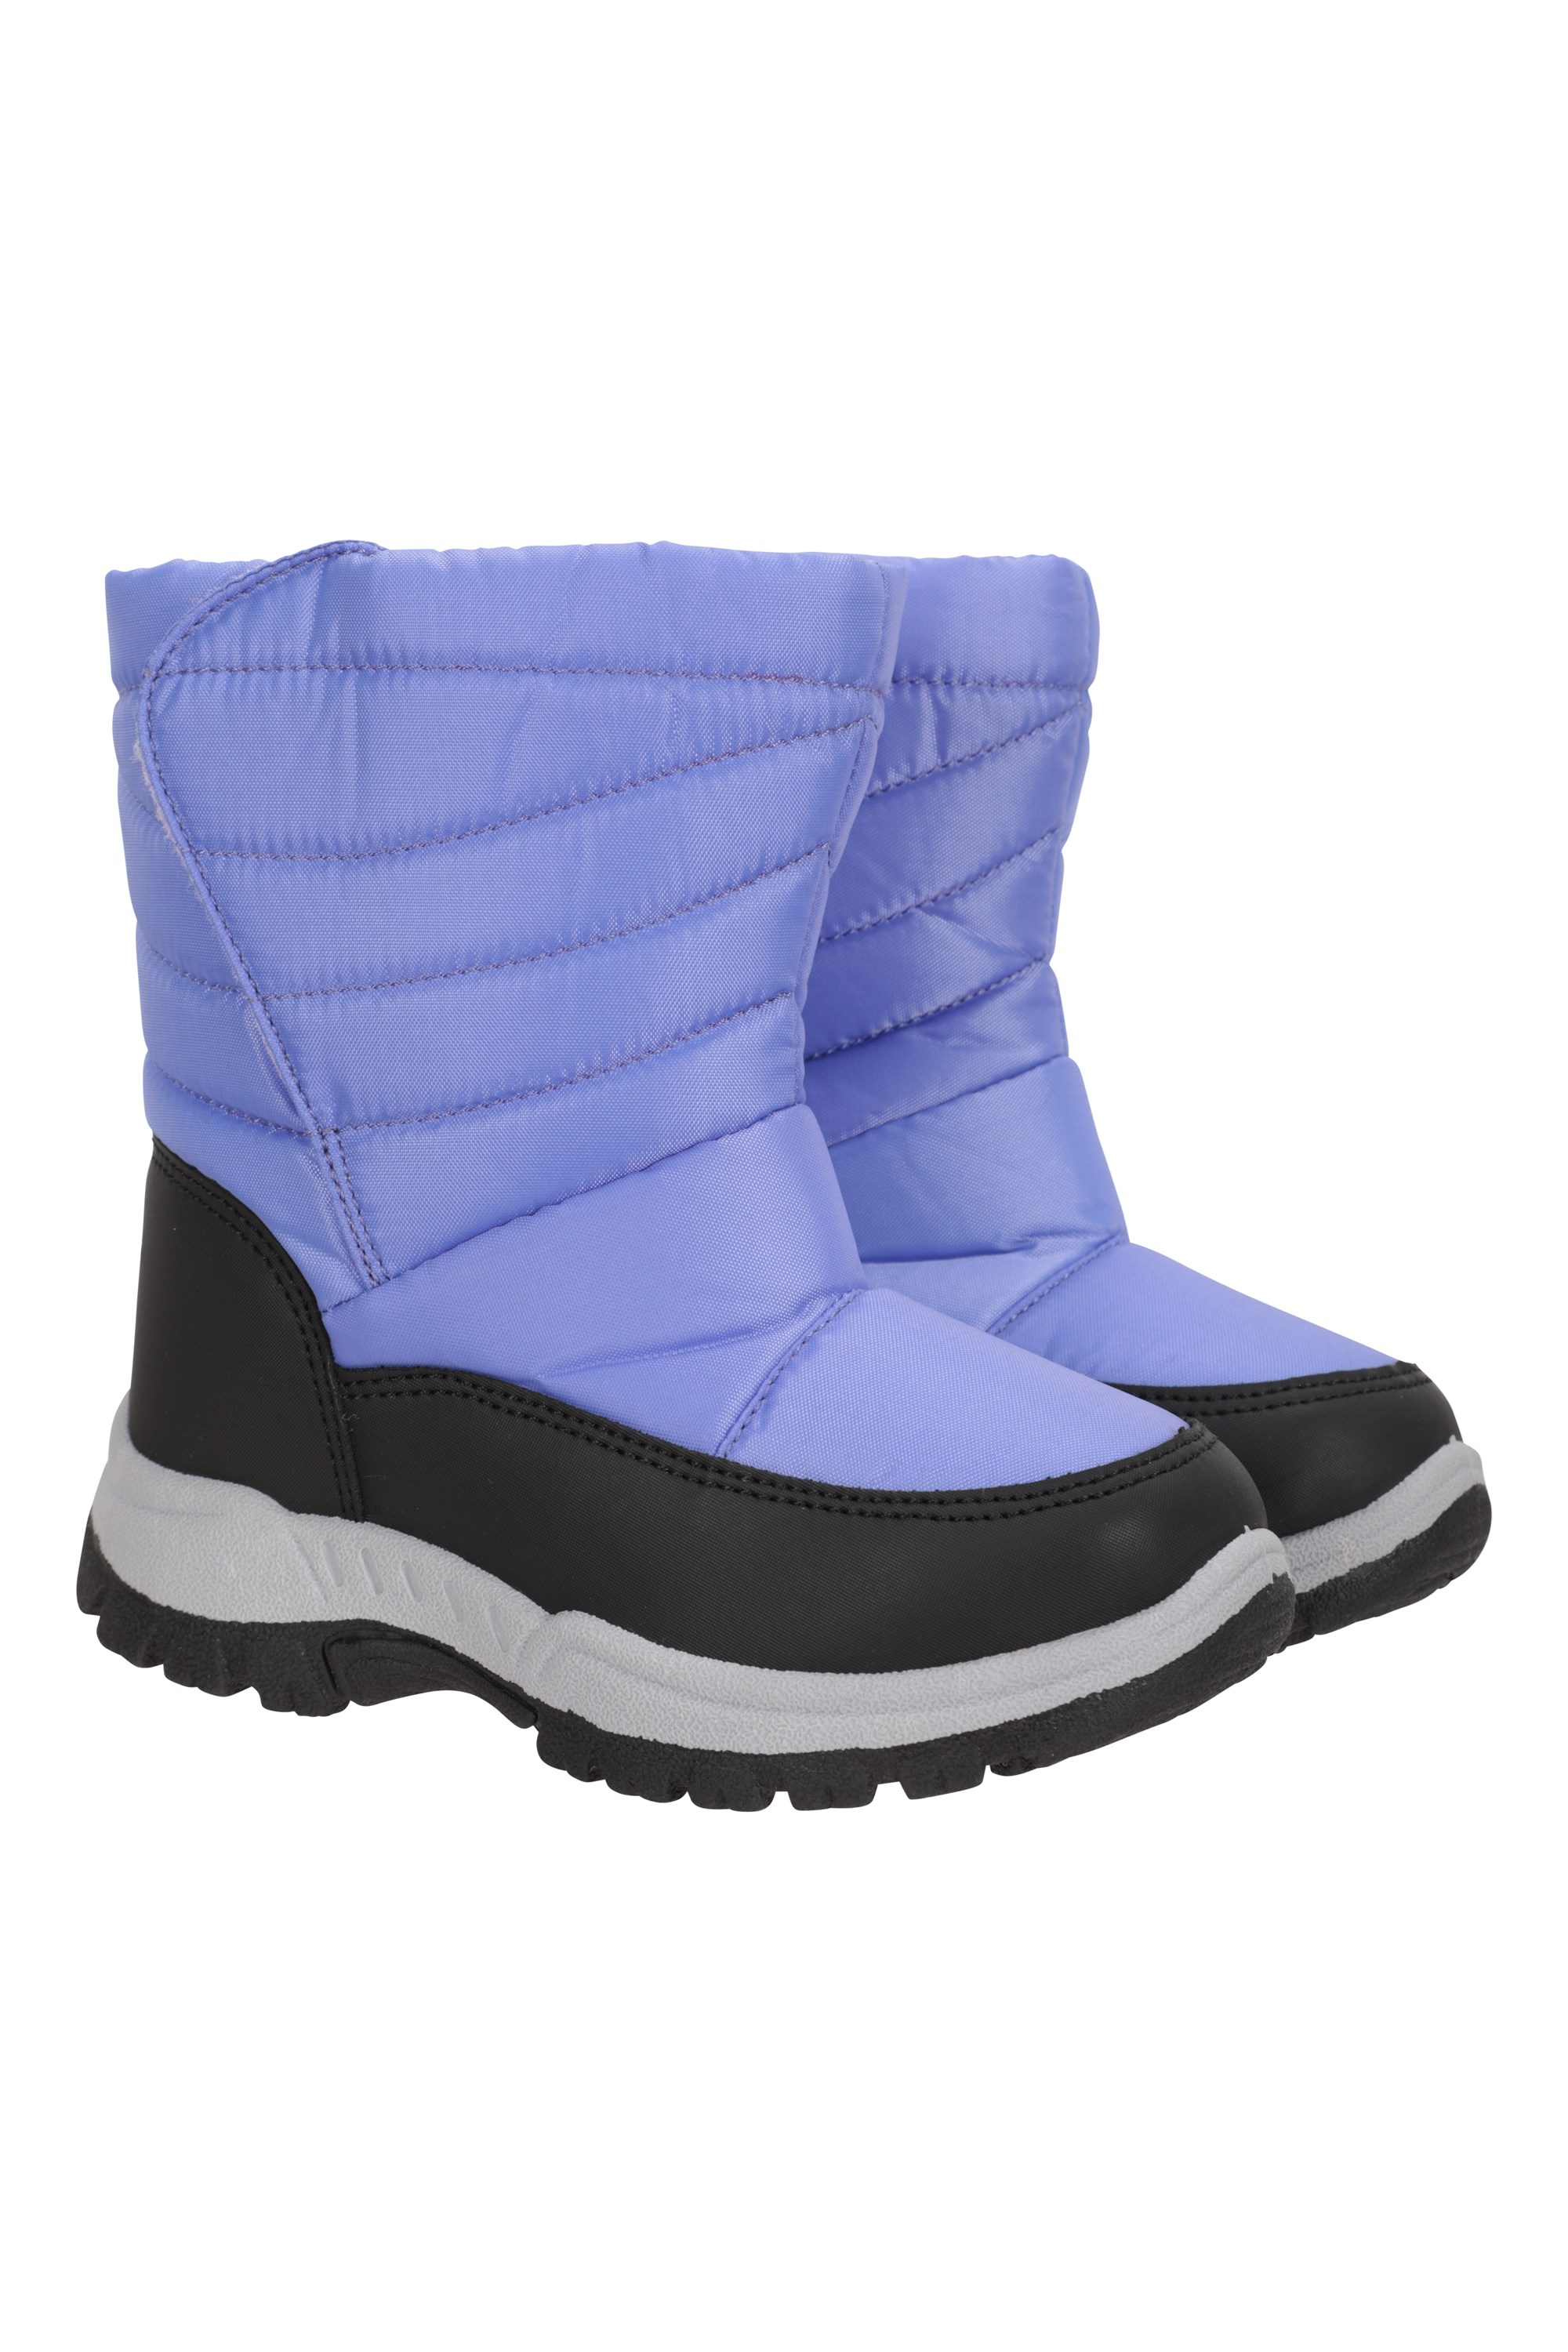 Caribou Toddler Adaptive Snow Boots - Purple